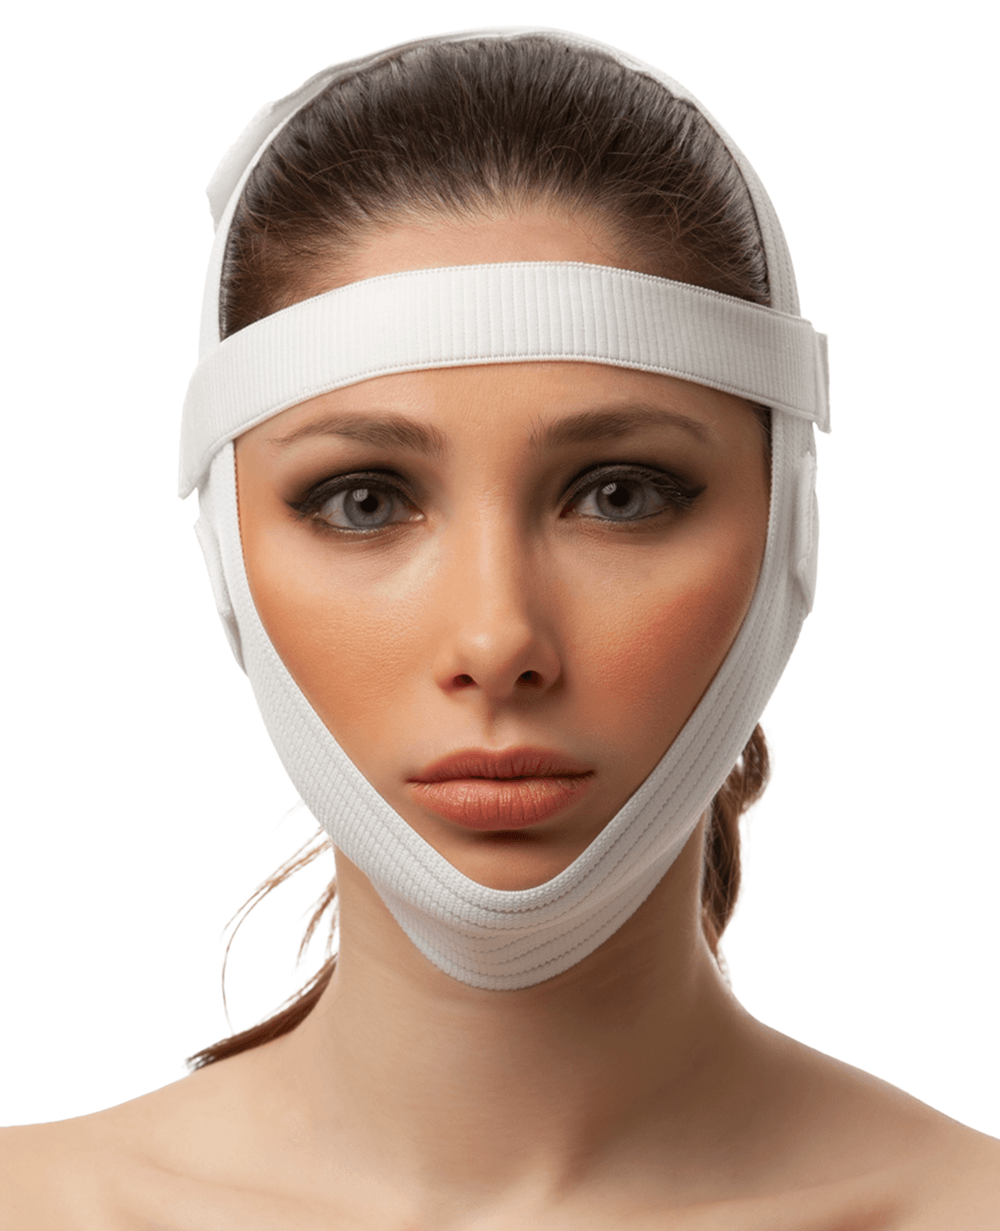 Isavela Chin Strap With Full Neck Support